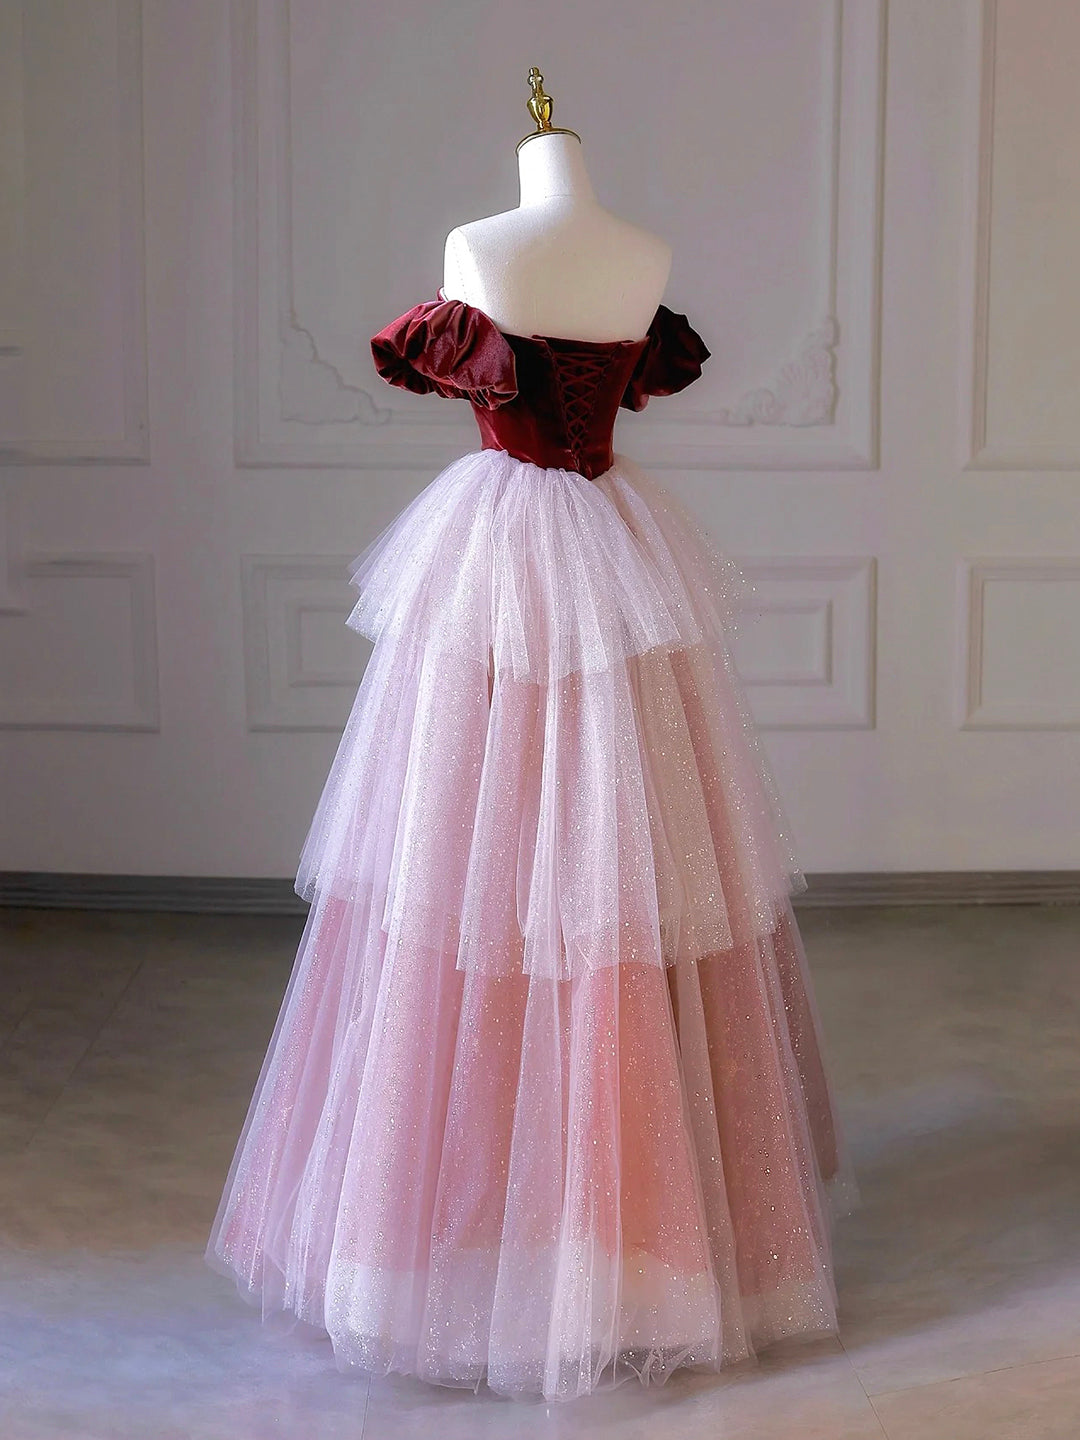 Burgundy Velvet and Pink Tulle Long Prom Dress, Off the Shoulder A-Line Evening Party Dress